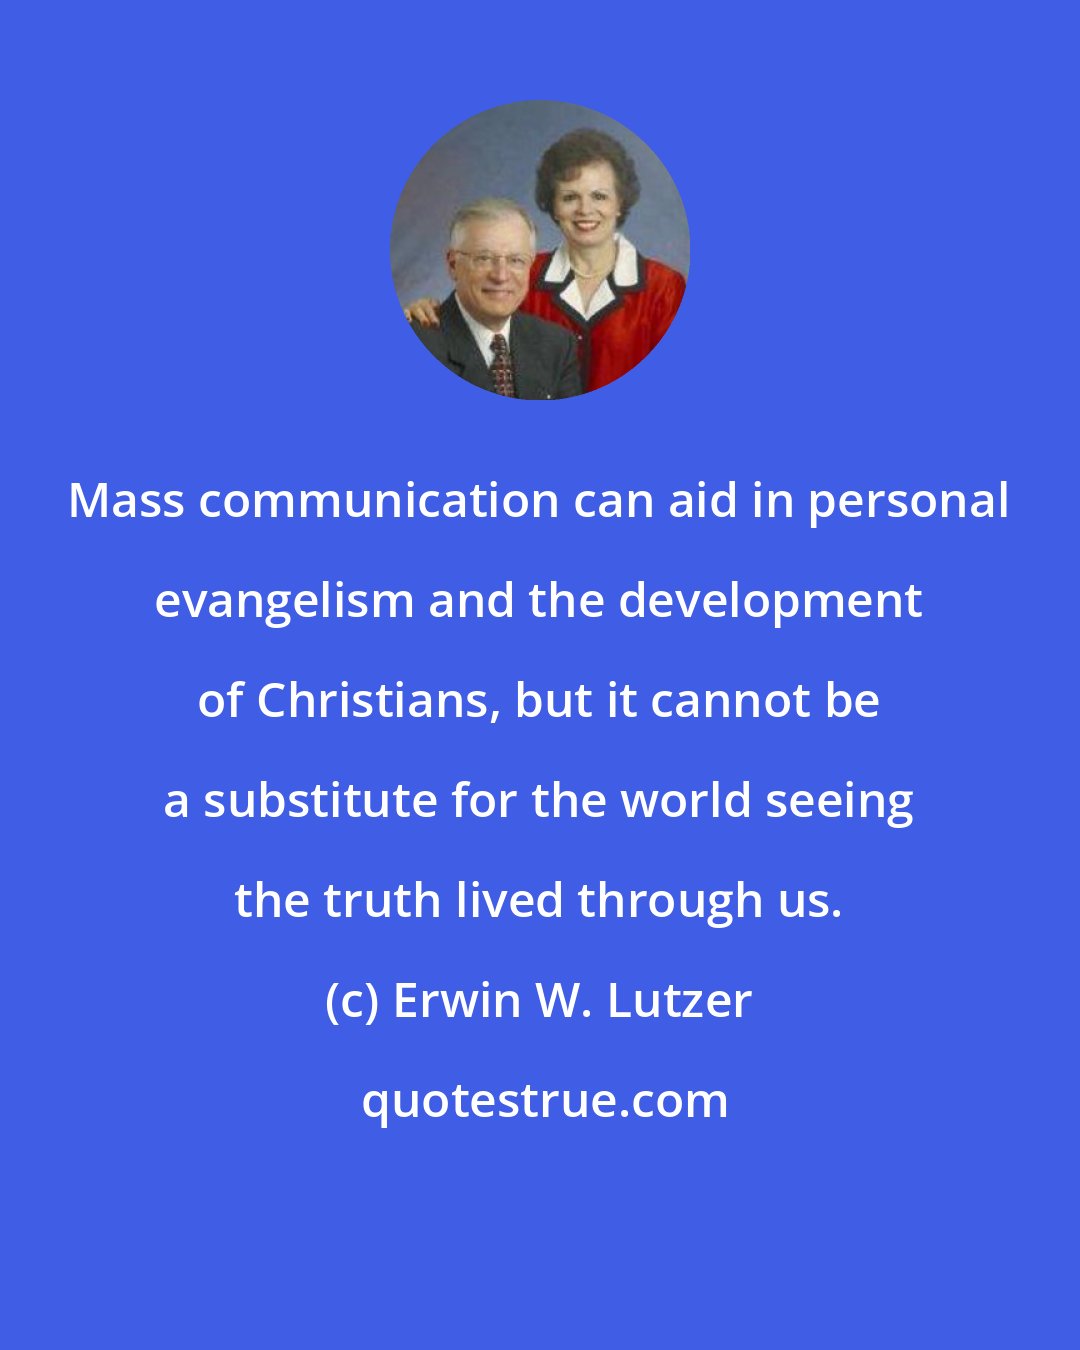 Erwin W. Lutzer: Mass communication can aid in personal evangelism and the development of Christians, but it cannot be a substitute for the world seeing the truth lived through us.